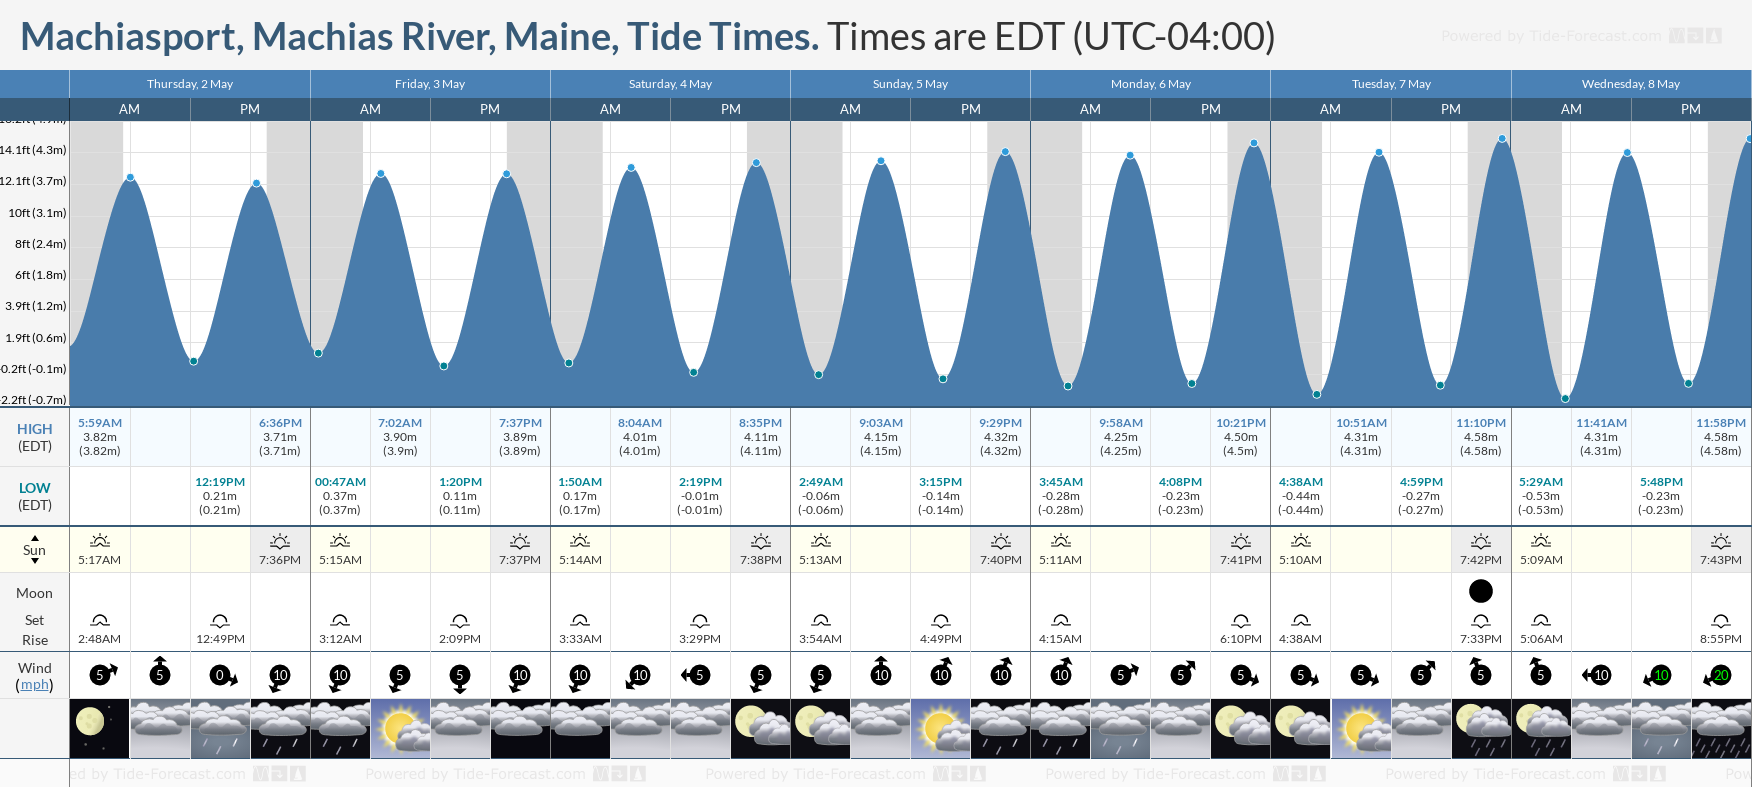 Machiasport, Machias River, Maine Tide Chart including high and low tide tide times for the next 7 days